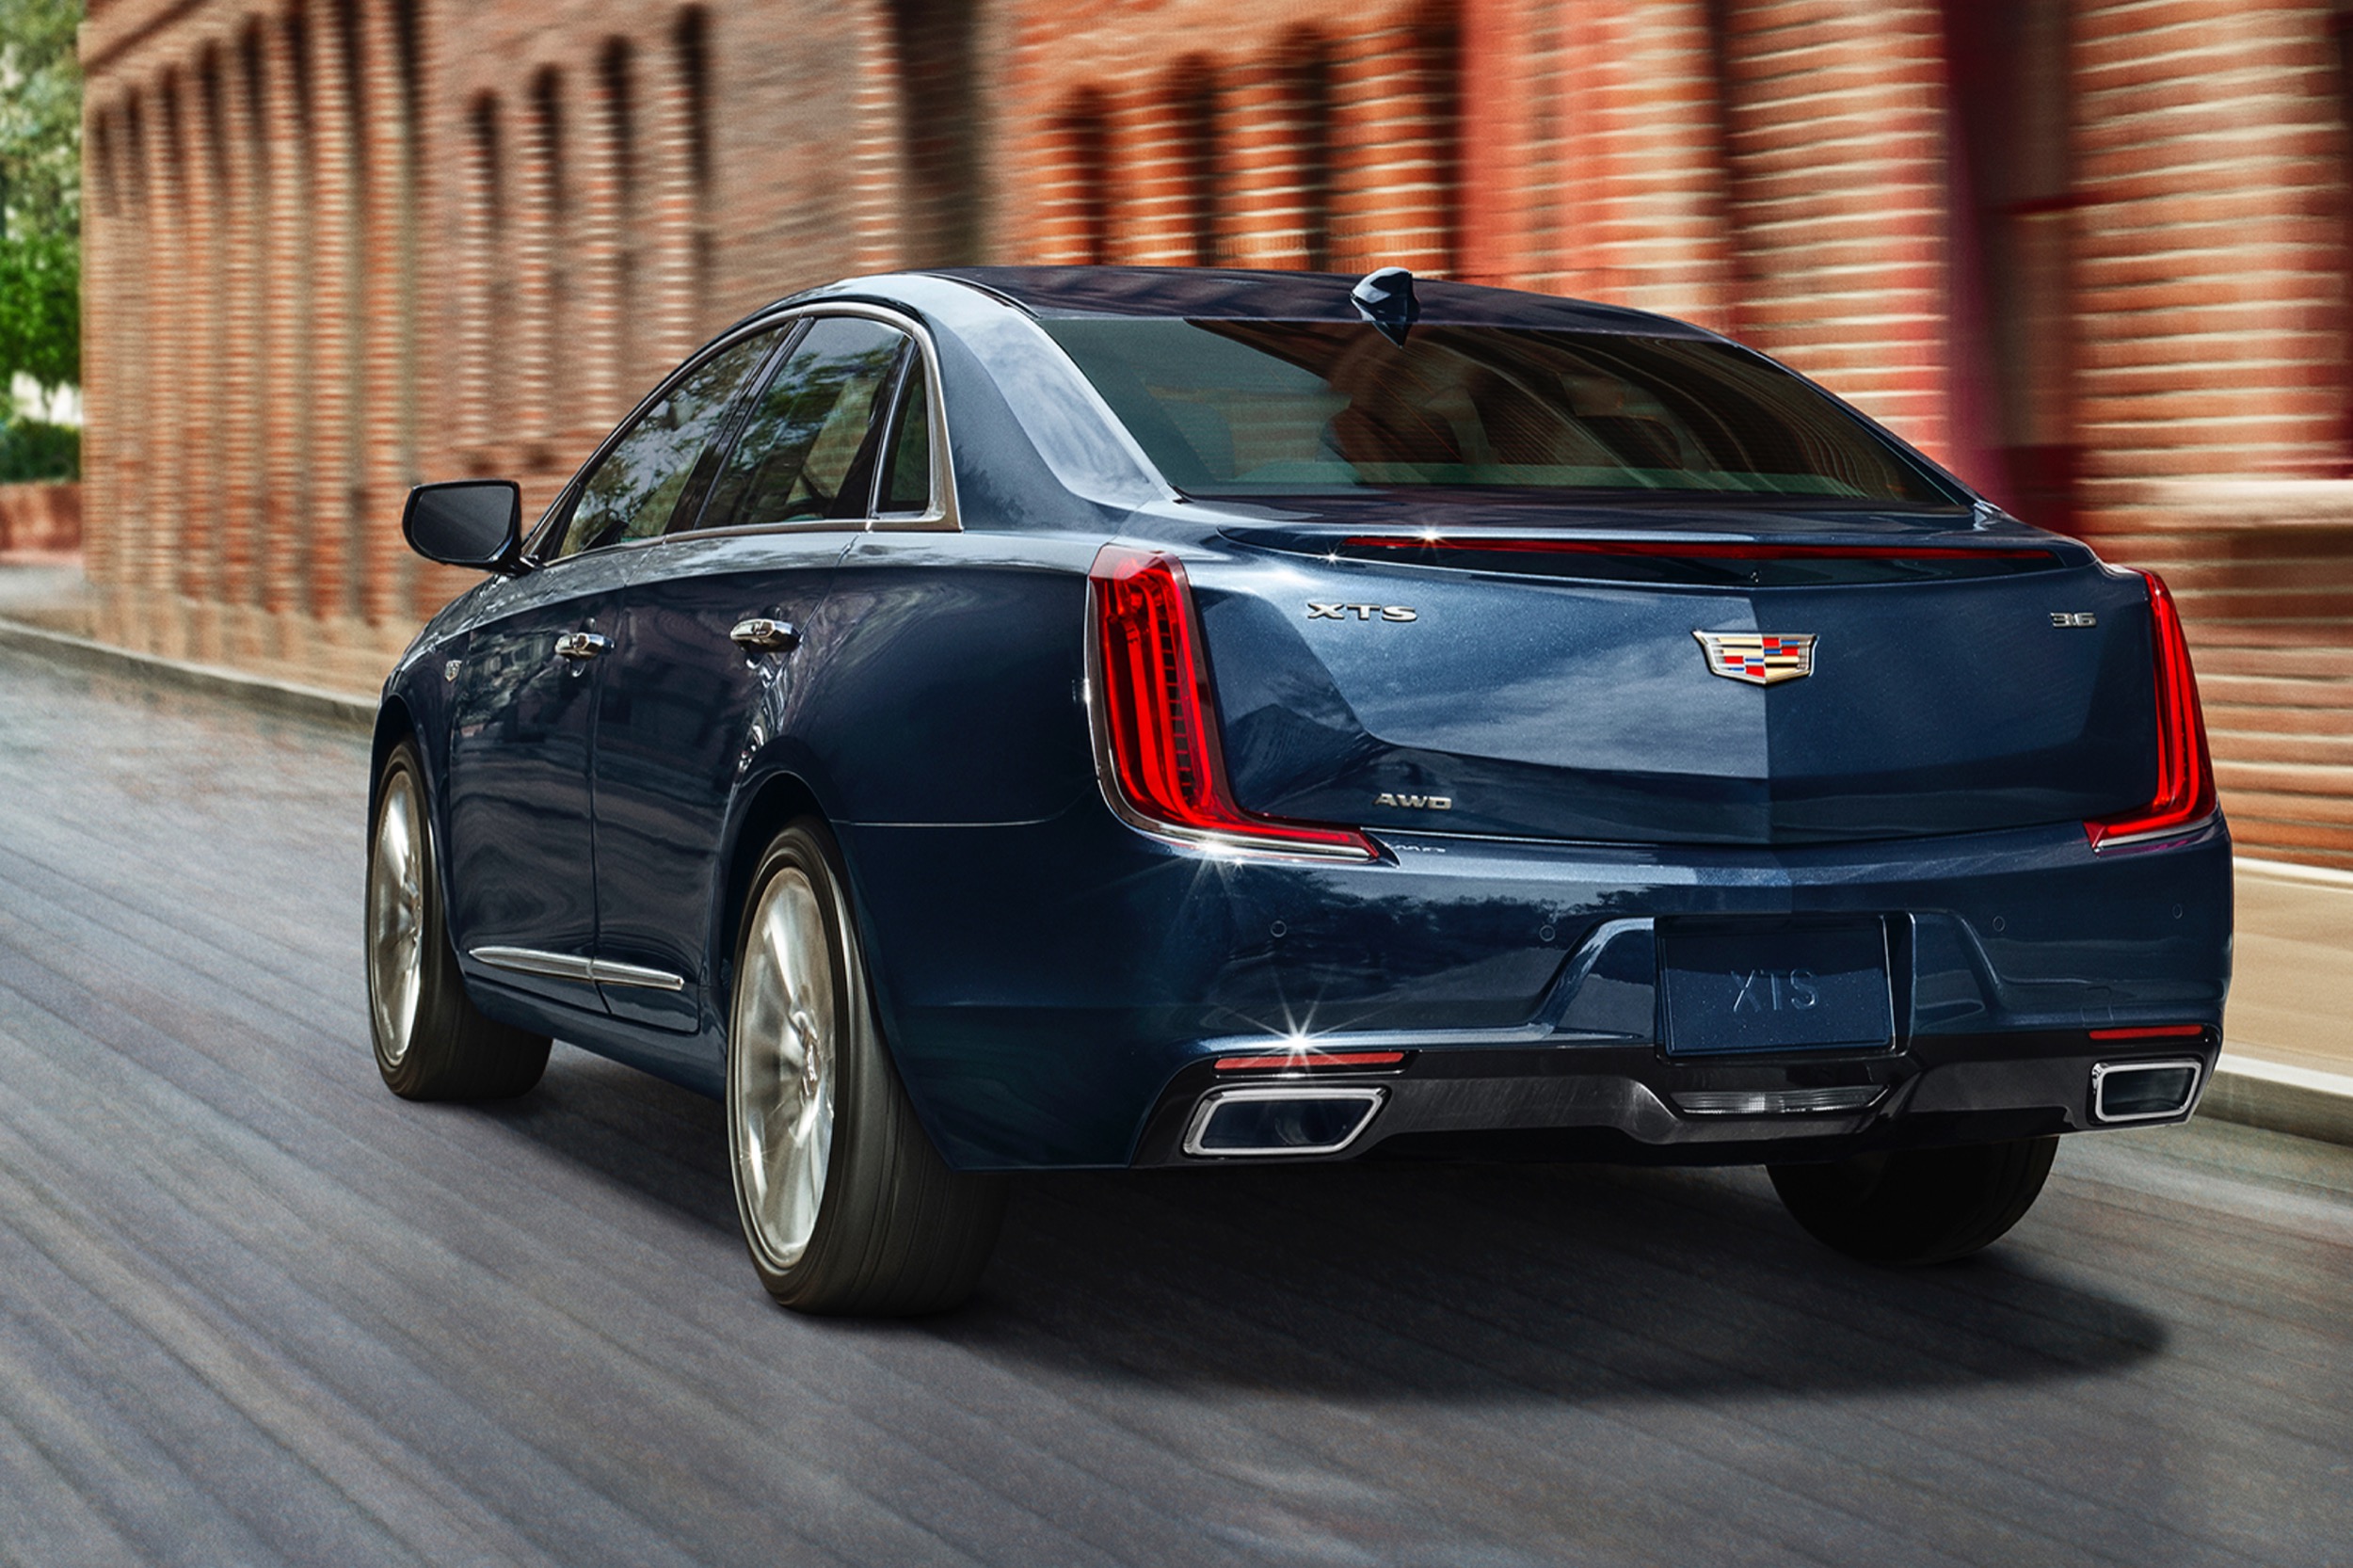 2020 Cadillac XTS Info, Pictures, Specs, Wiki | GM Authority